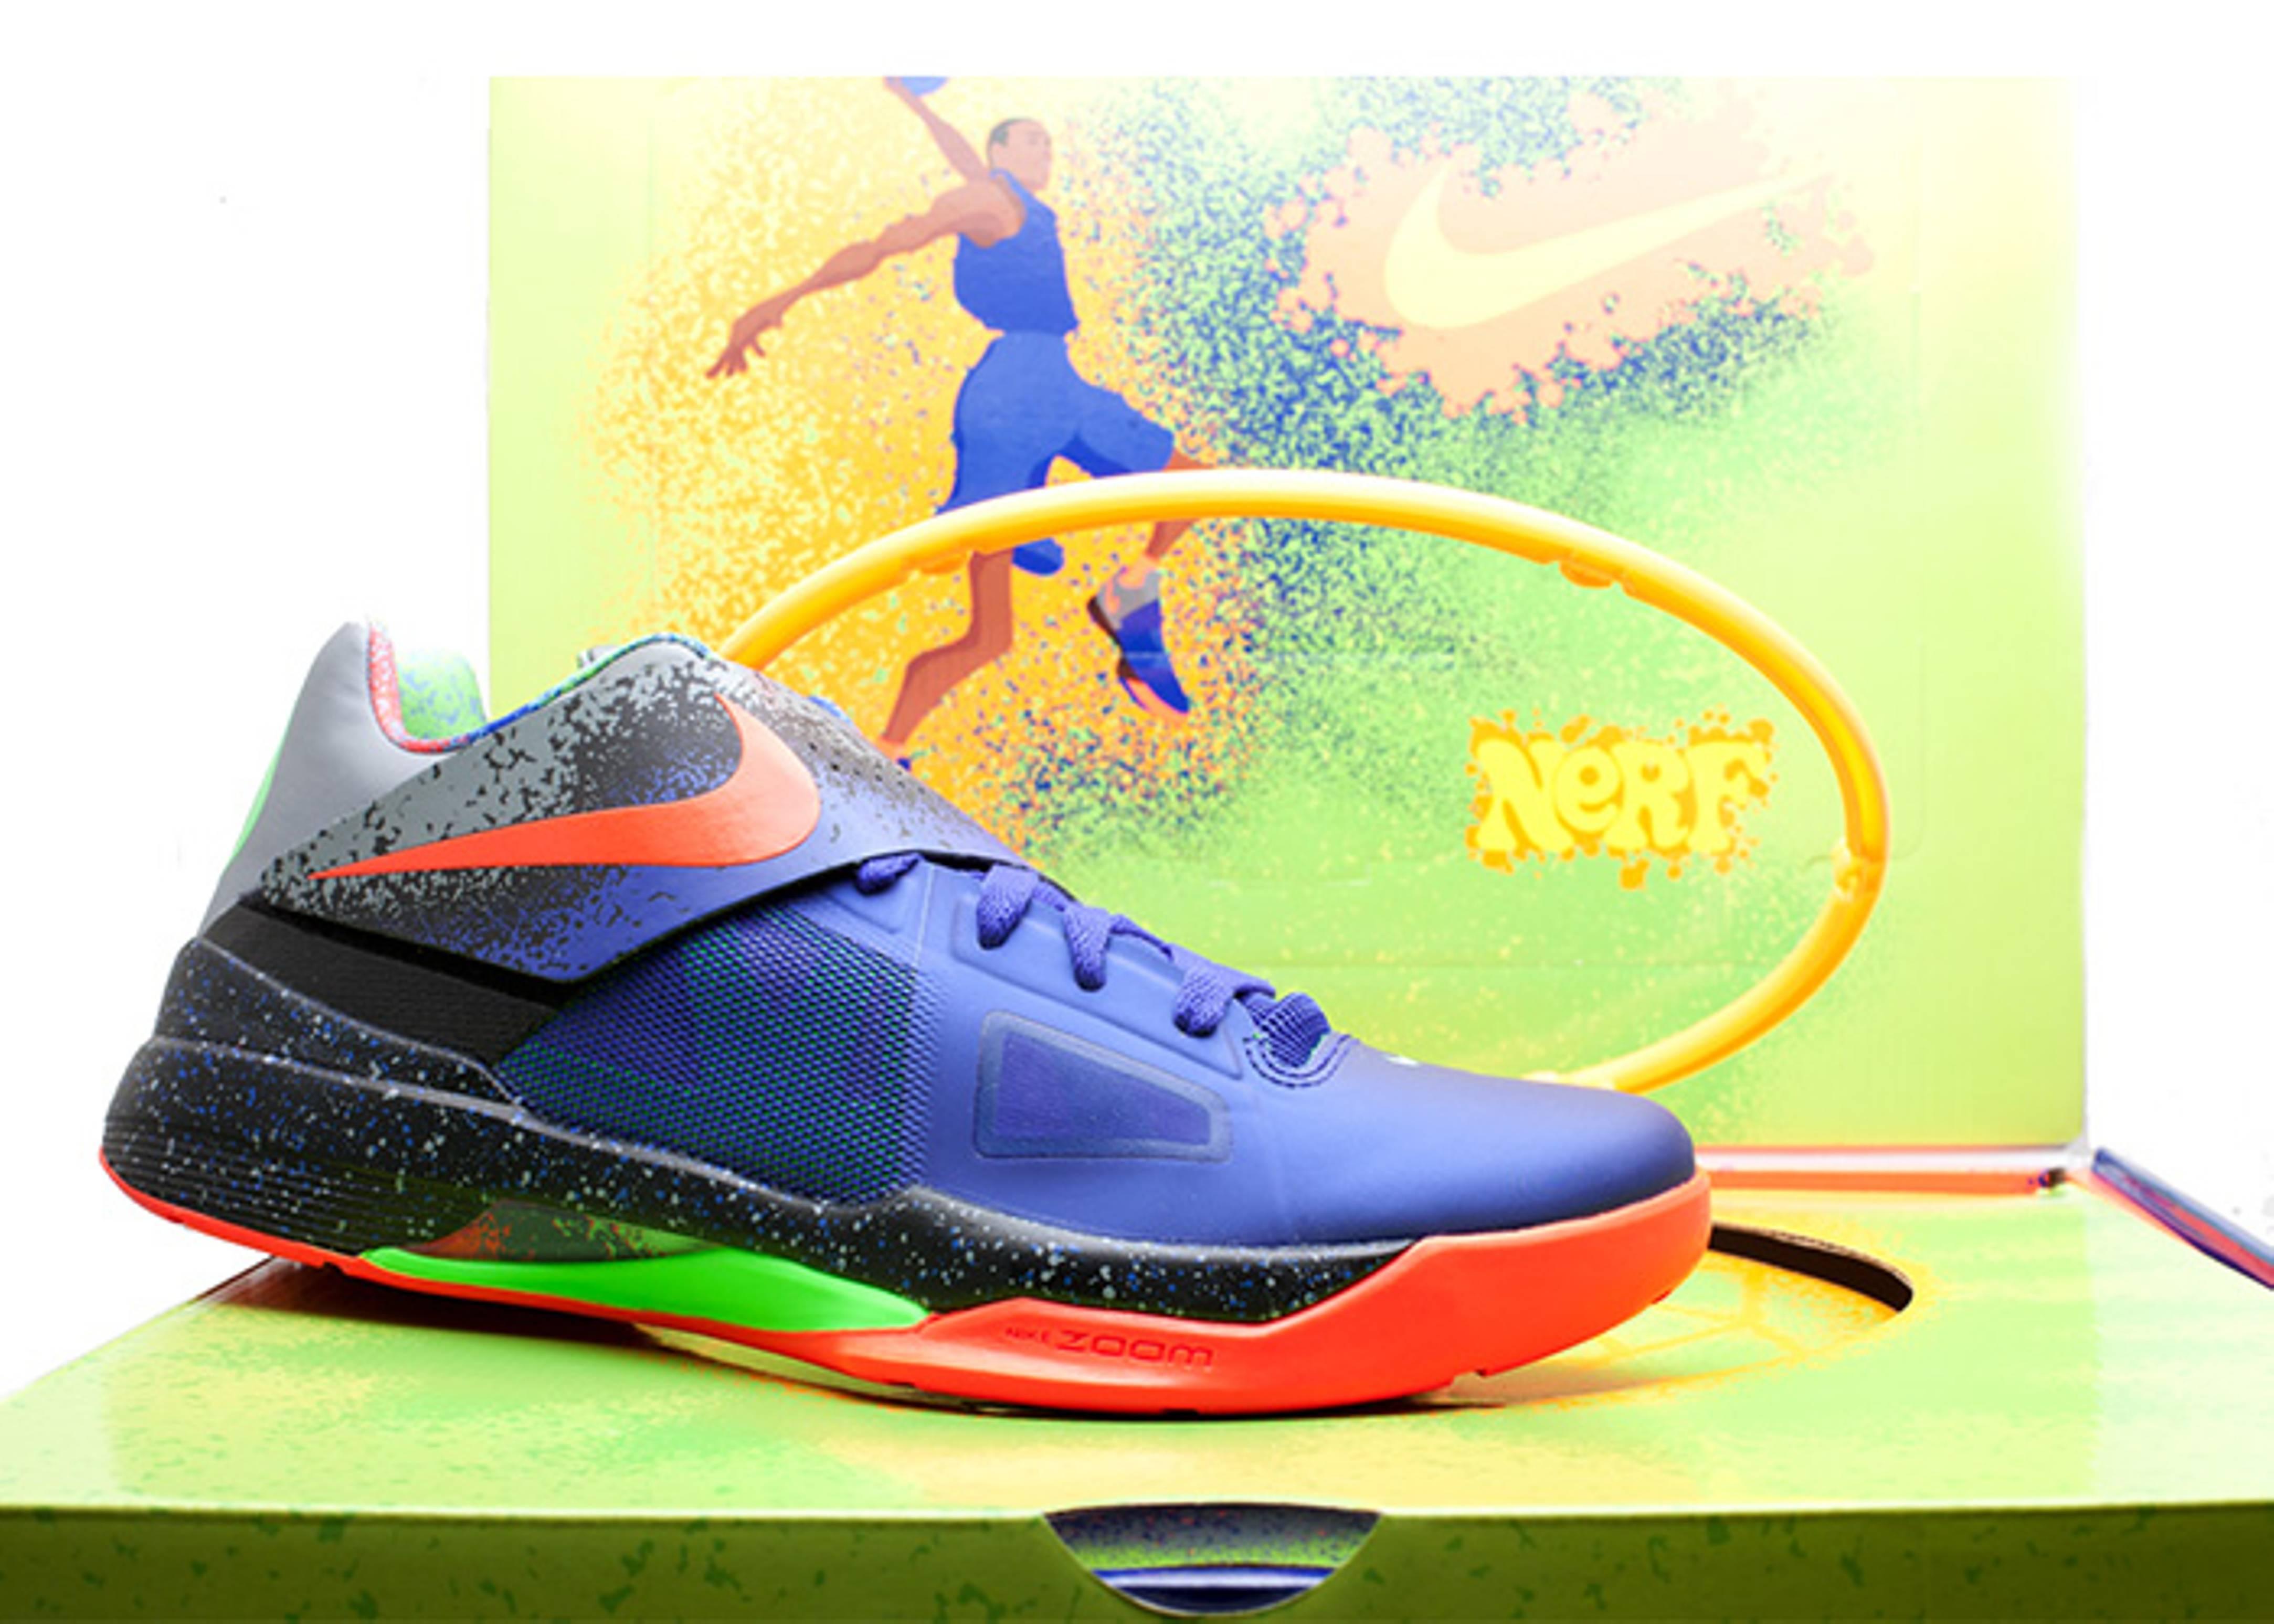 Nike Zoom Kd 4 'nerf' Shoes - Size 9.5 